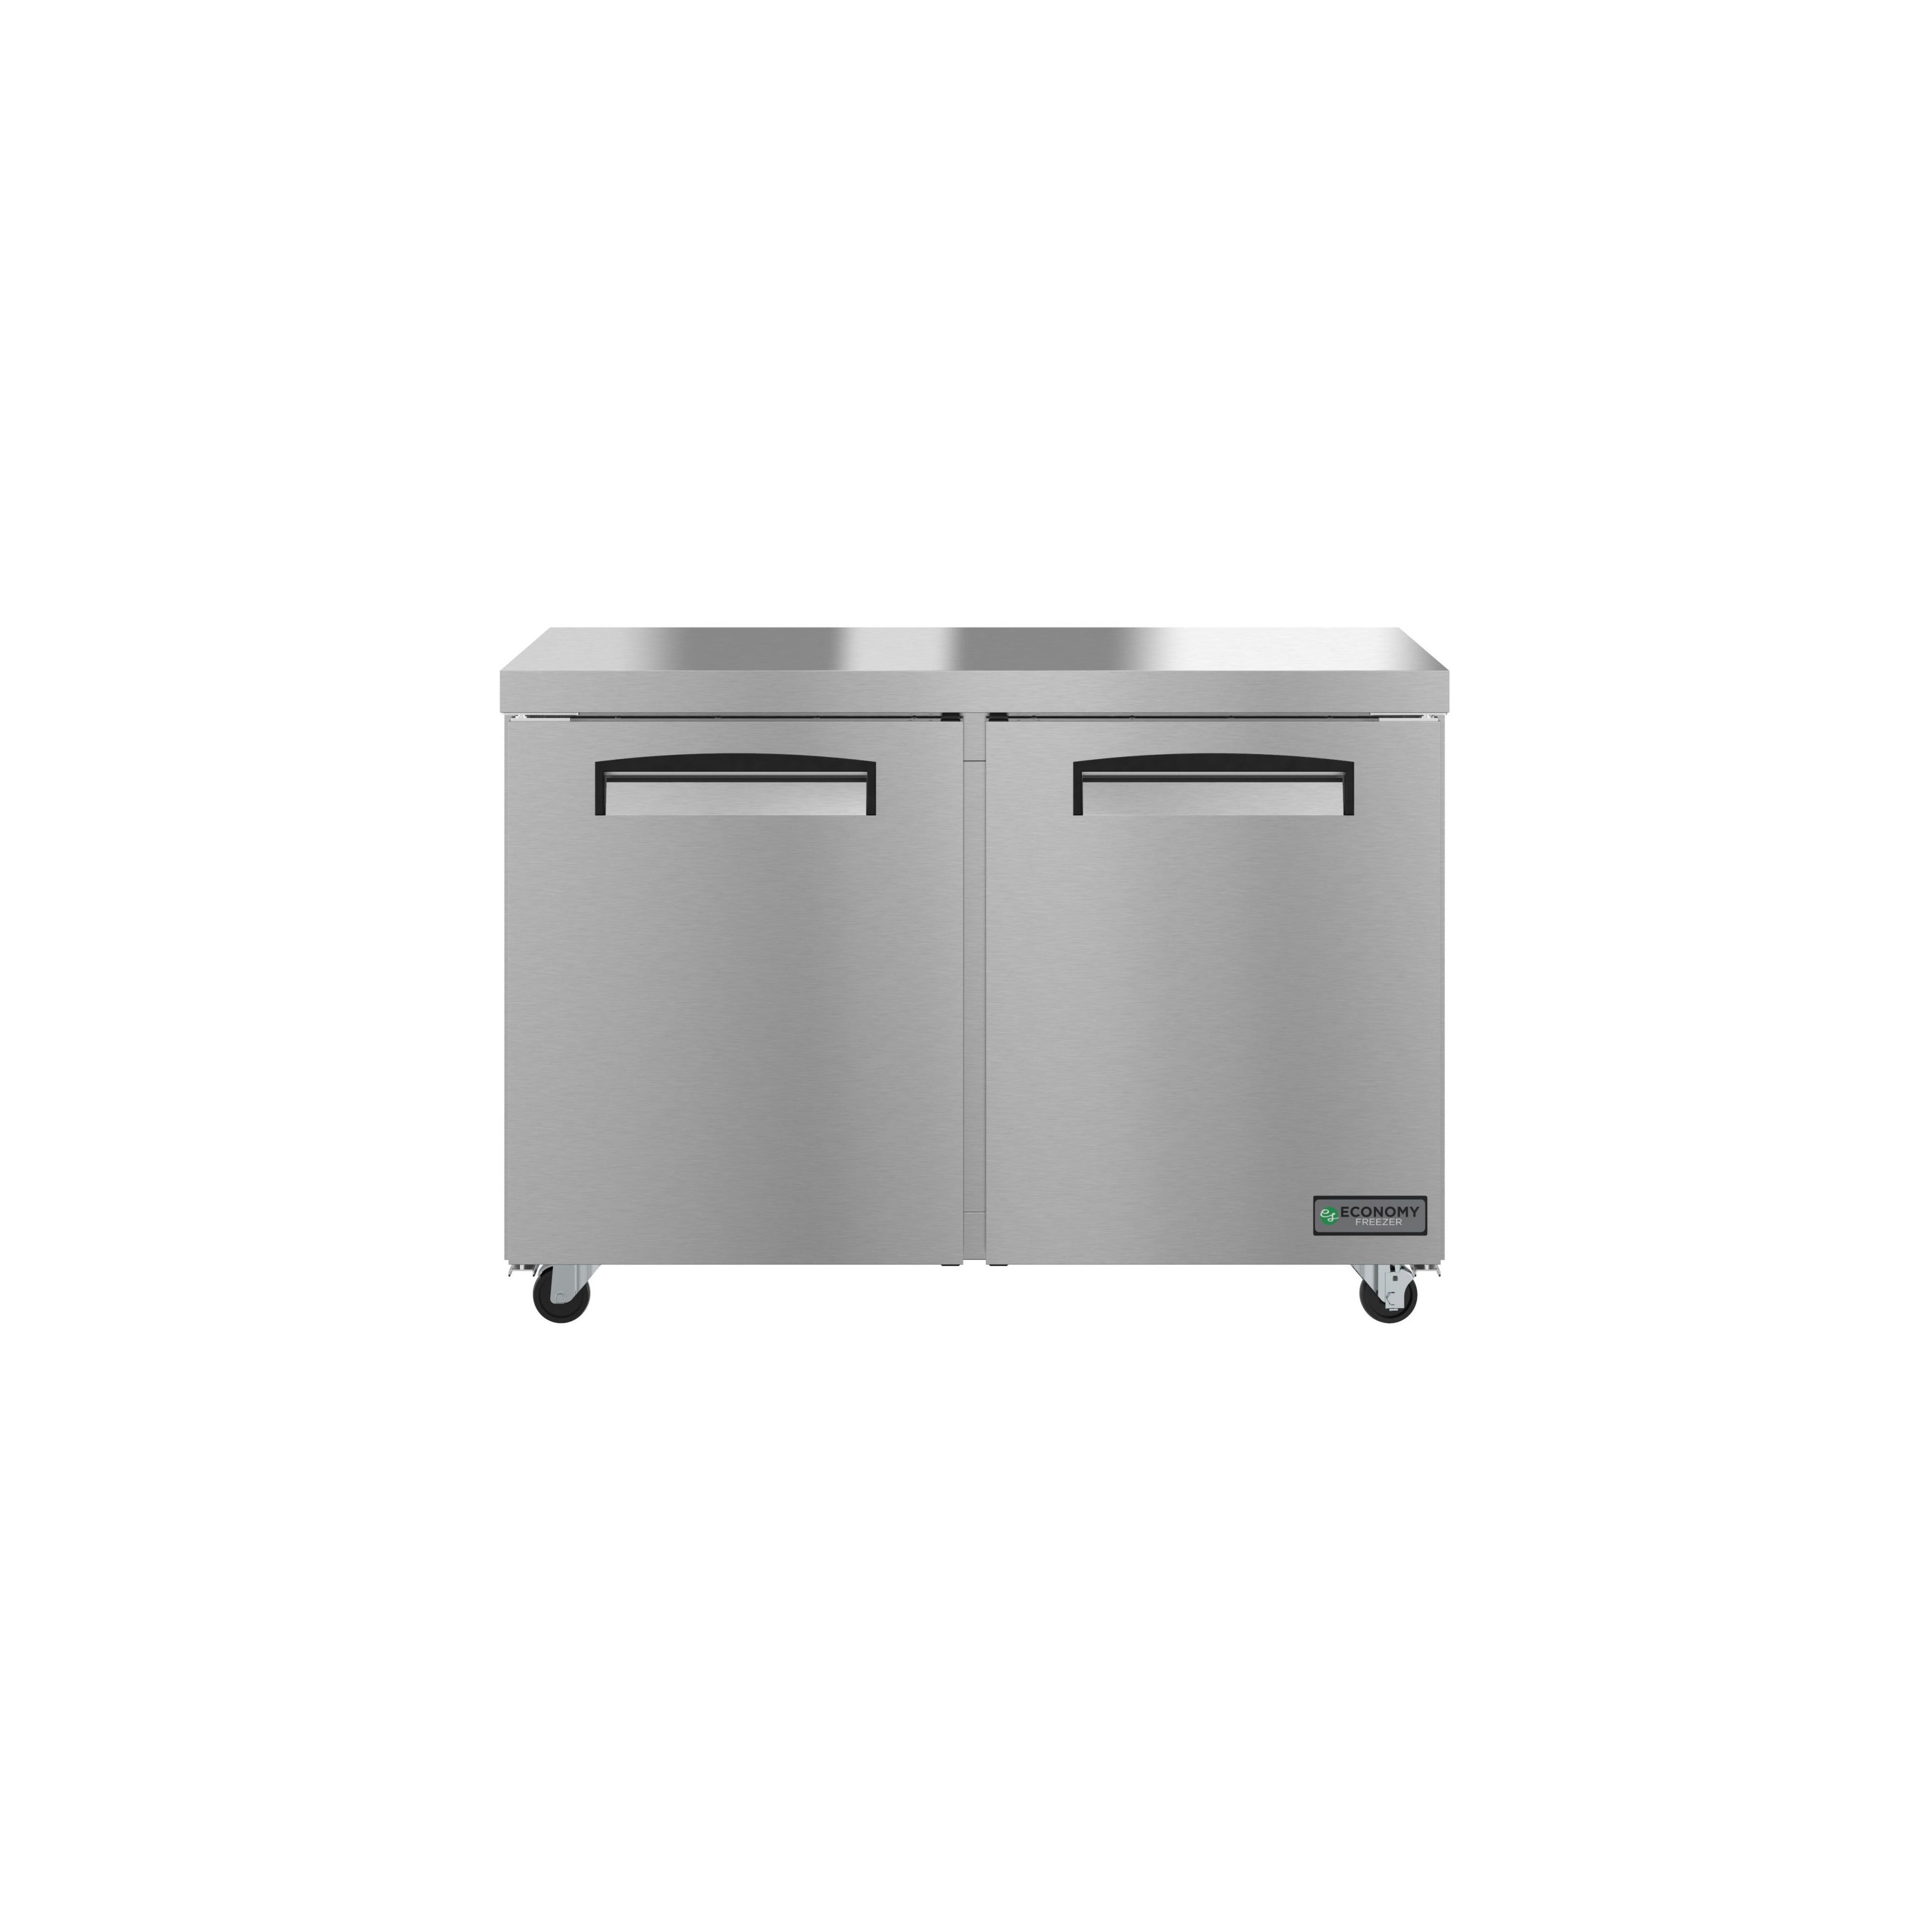 Hoshizaki - EUF48A, Commercial 47.75"  2 Section Undercounter Freezer Stainless Doors 12.9cu.ft.